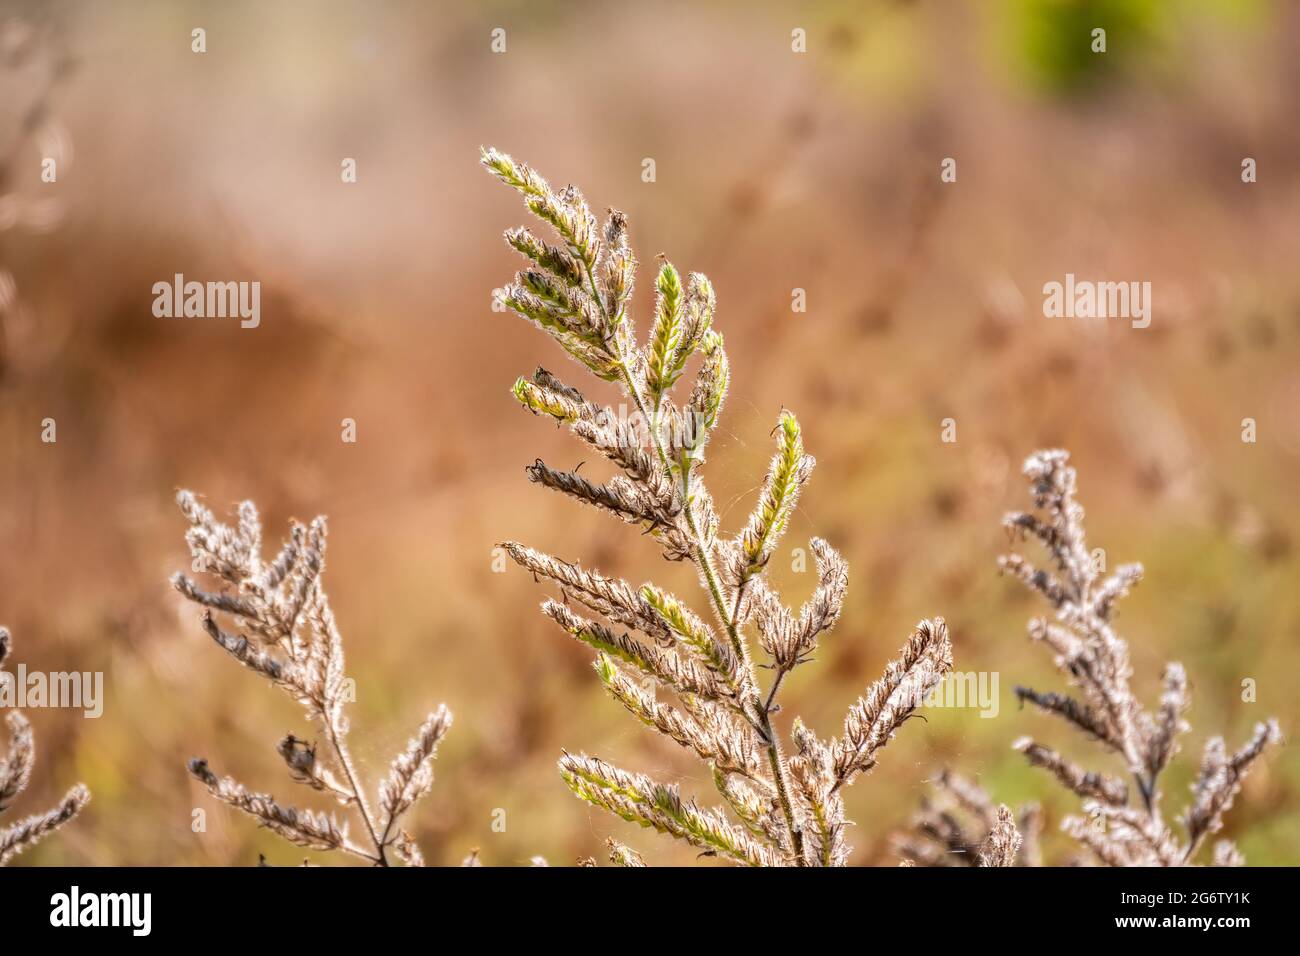 Yellow autumn fluffy feather grass with seeds on curved stems in light wind. Slightly blurred close up with selective focus. Hello autumn concept. Nat Stock Photo